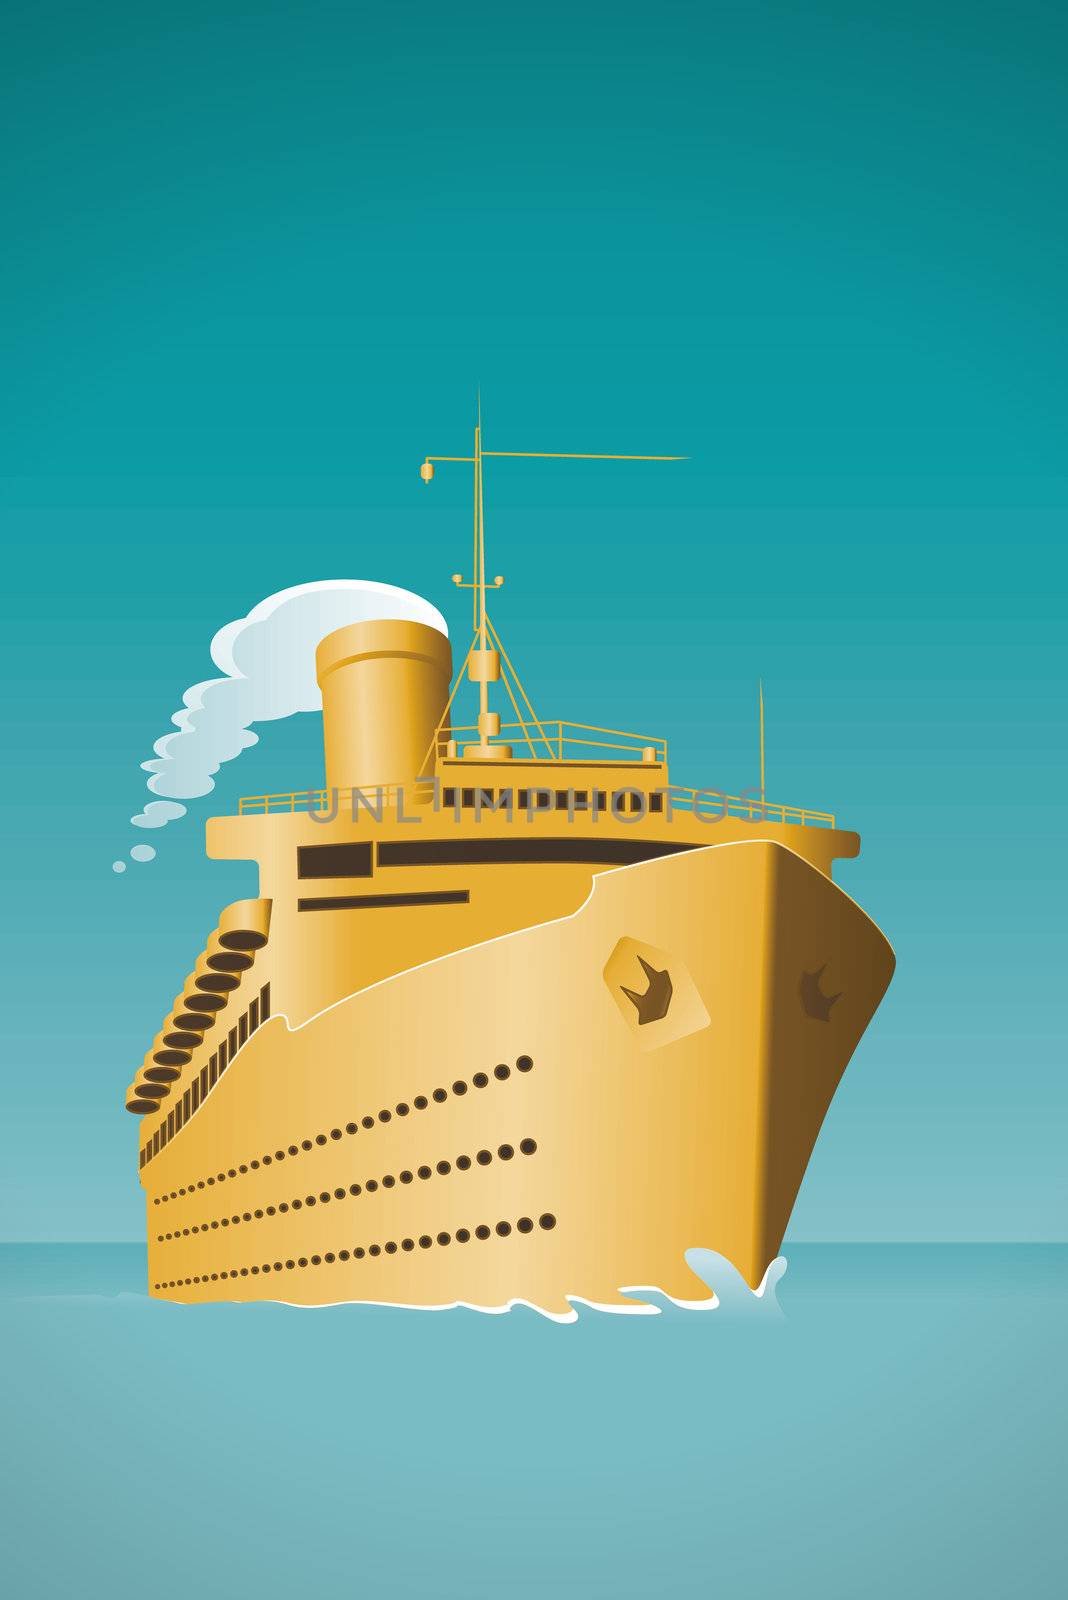 An old style cruise ship vector illustration